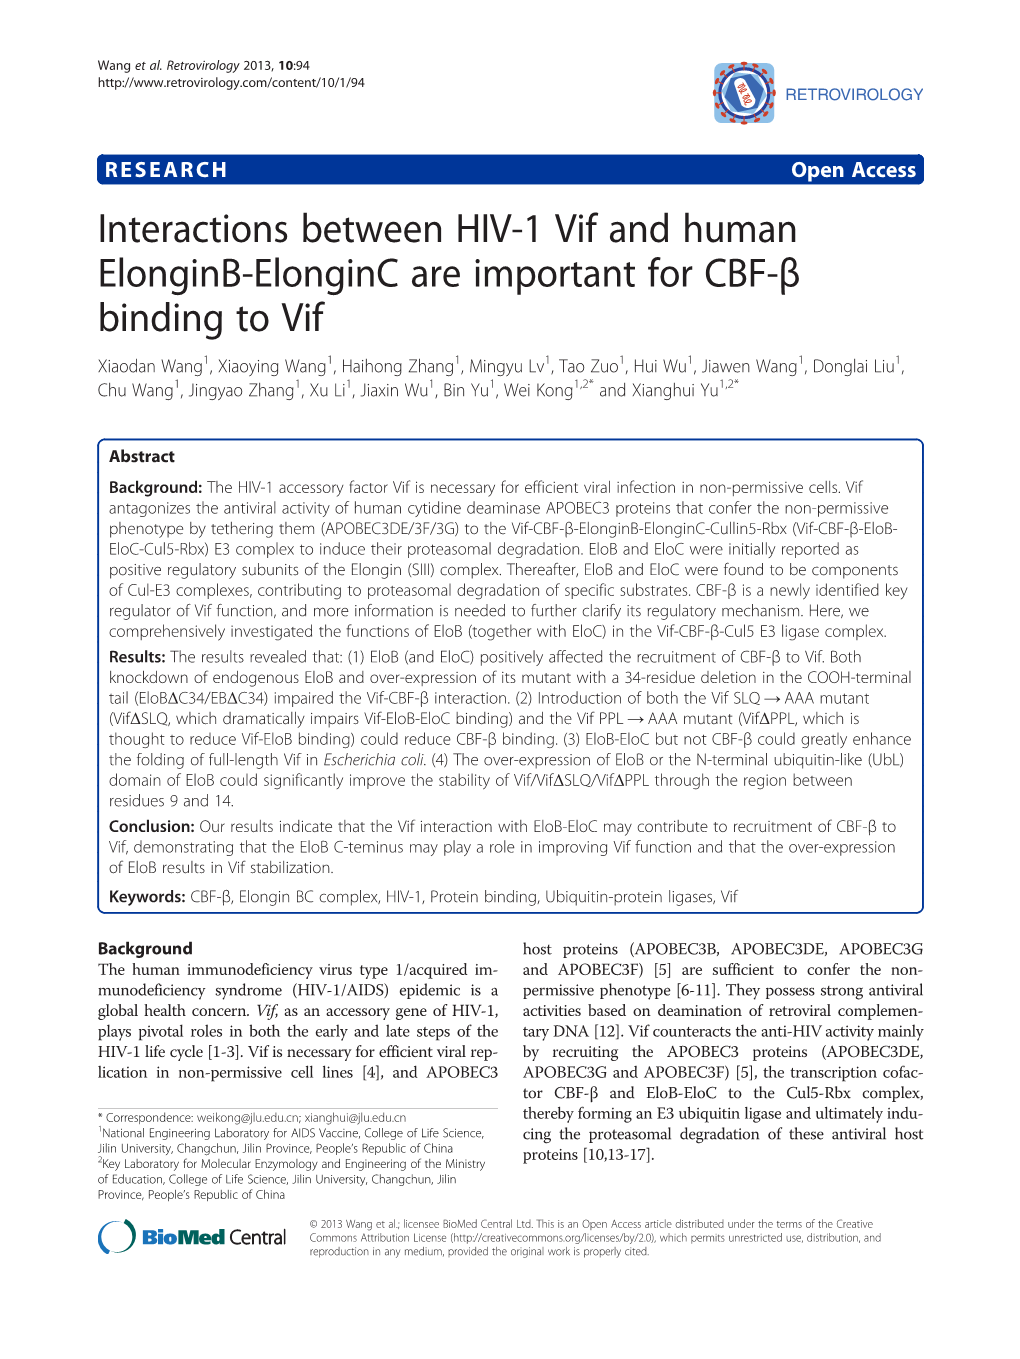 Interactions Between HIV-1 Vif and Human Elonginb-Elonginc Are Important for CBF-Β Binding To